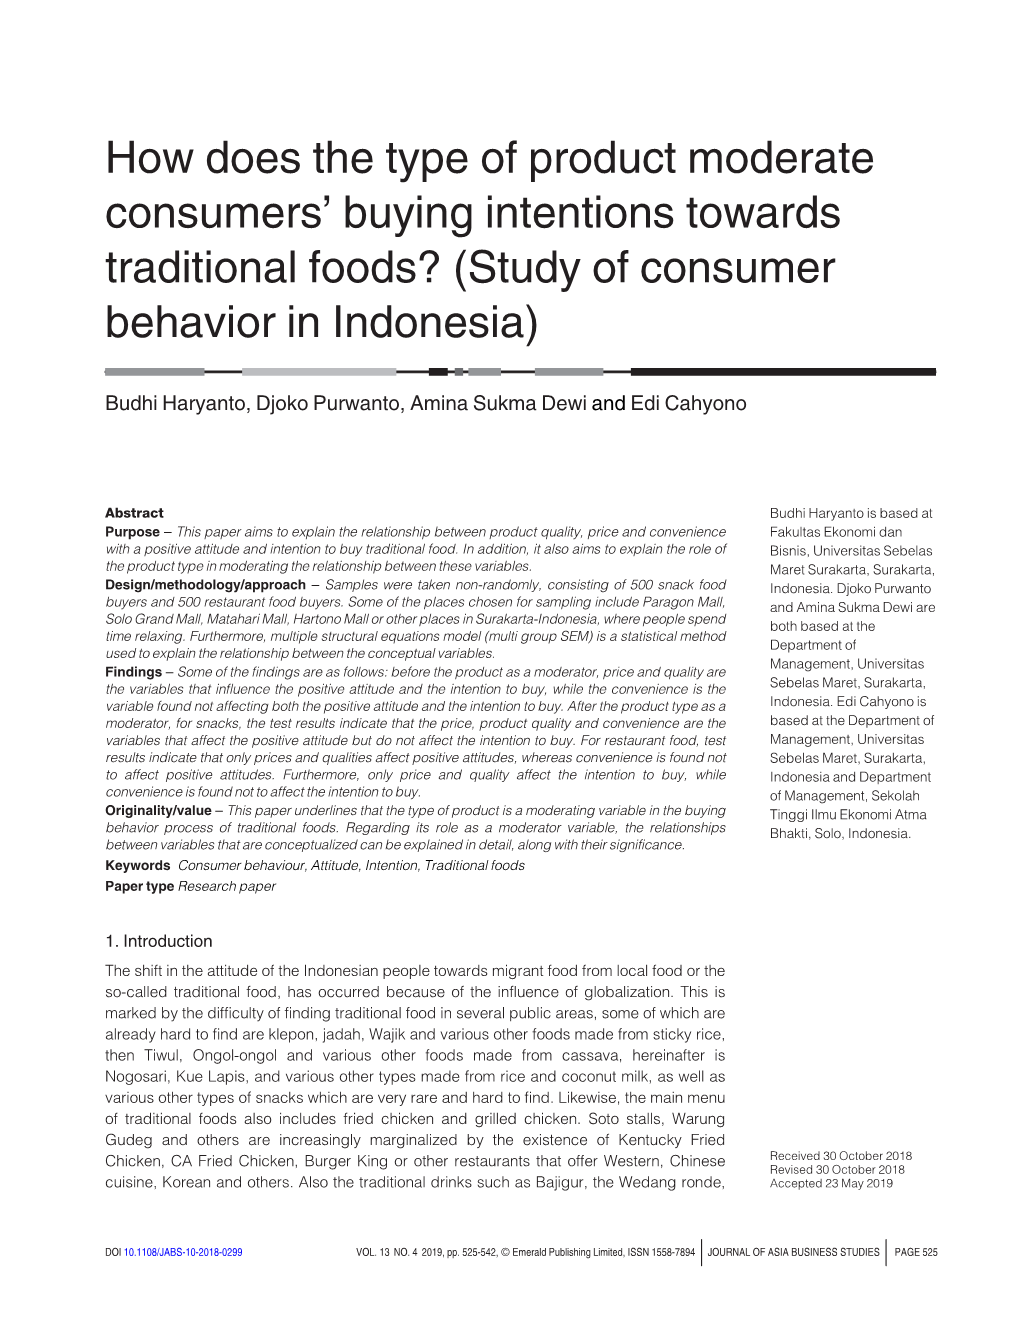 How Does the Type of Product Moderate Consumers' Buying